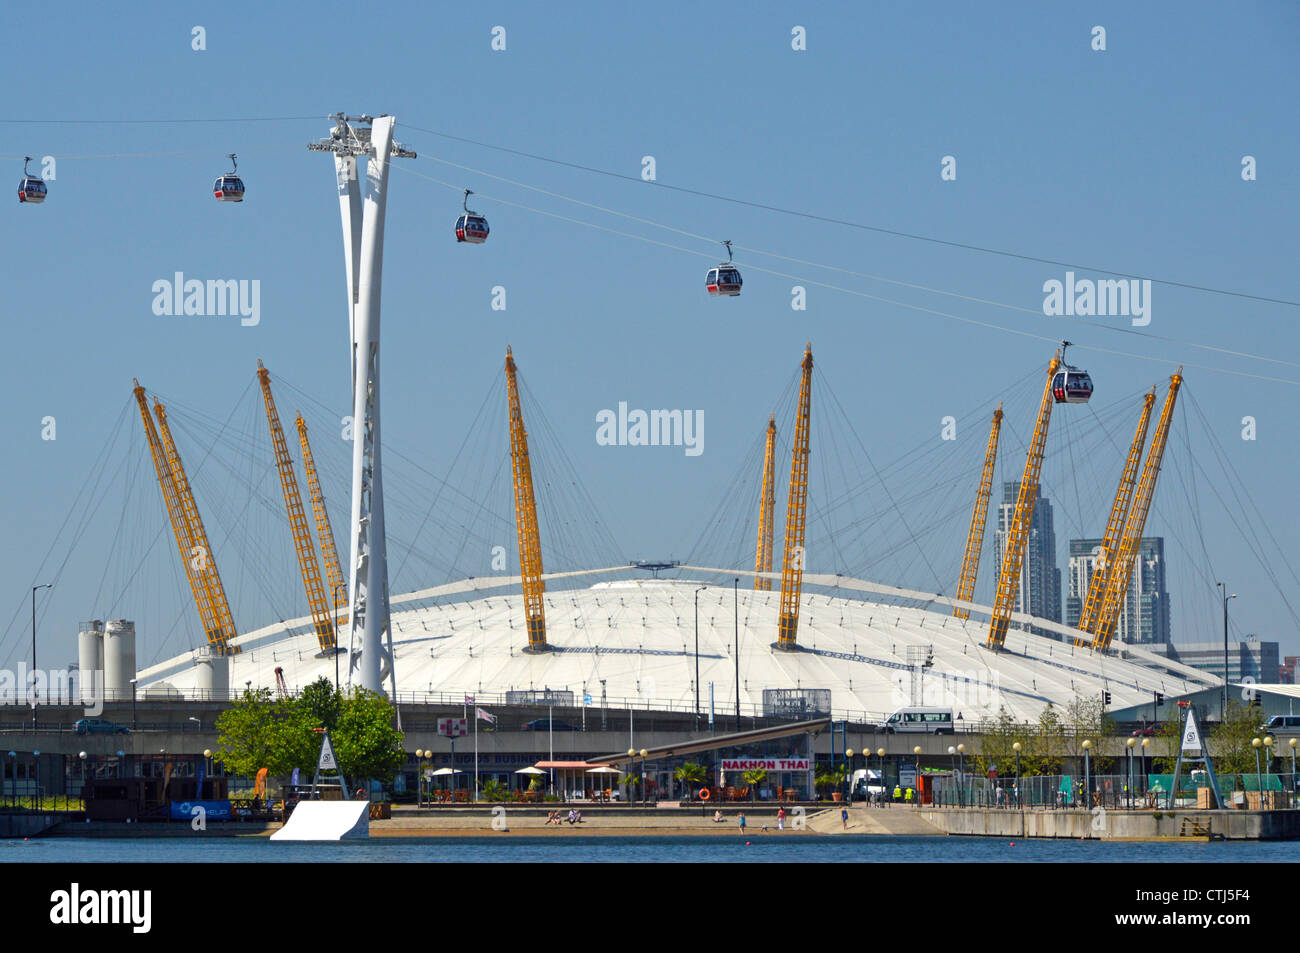 Emirates Air Line cable cars seen in front of The O2 arena dome viewed from Royal Docks crossing River Thames linking to North Greenwich England UK Stock Photo